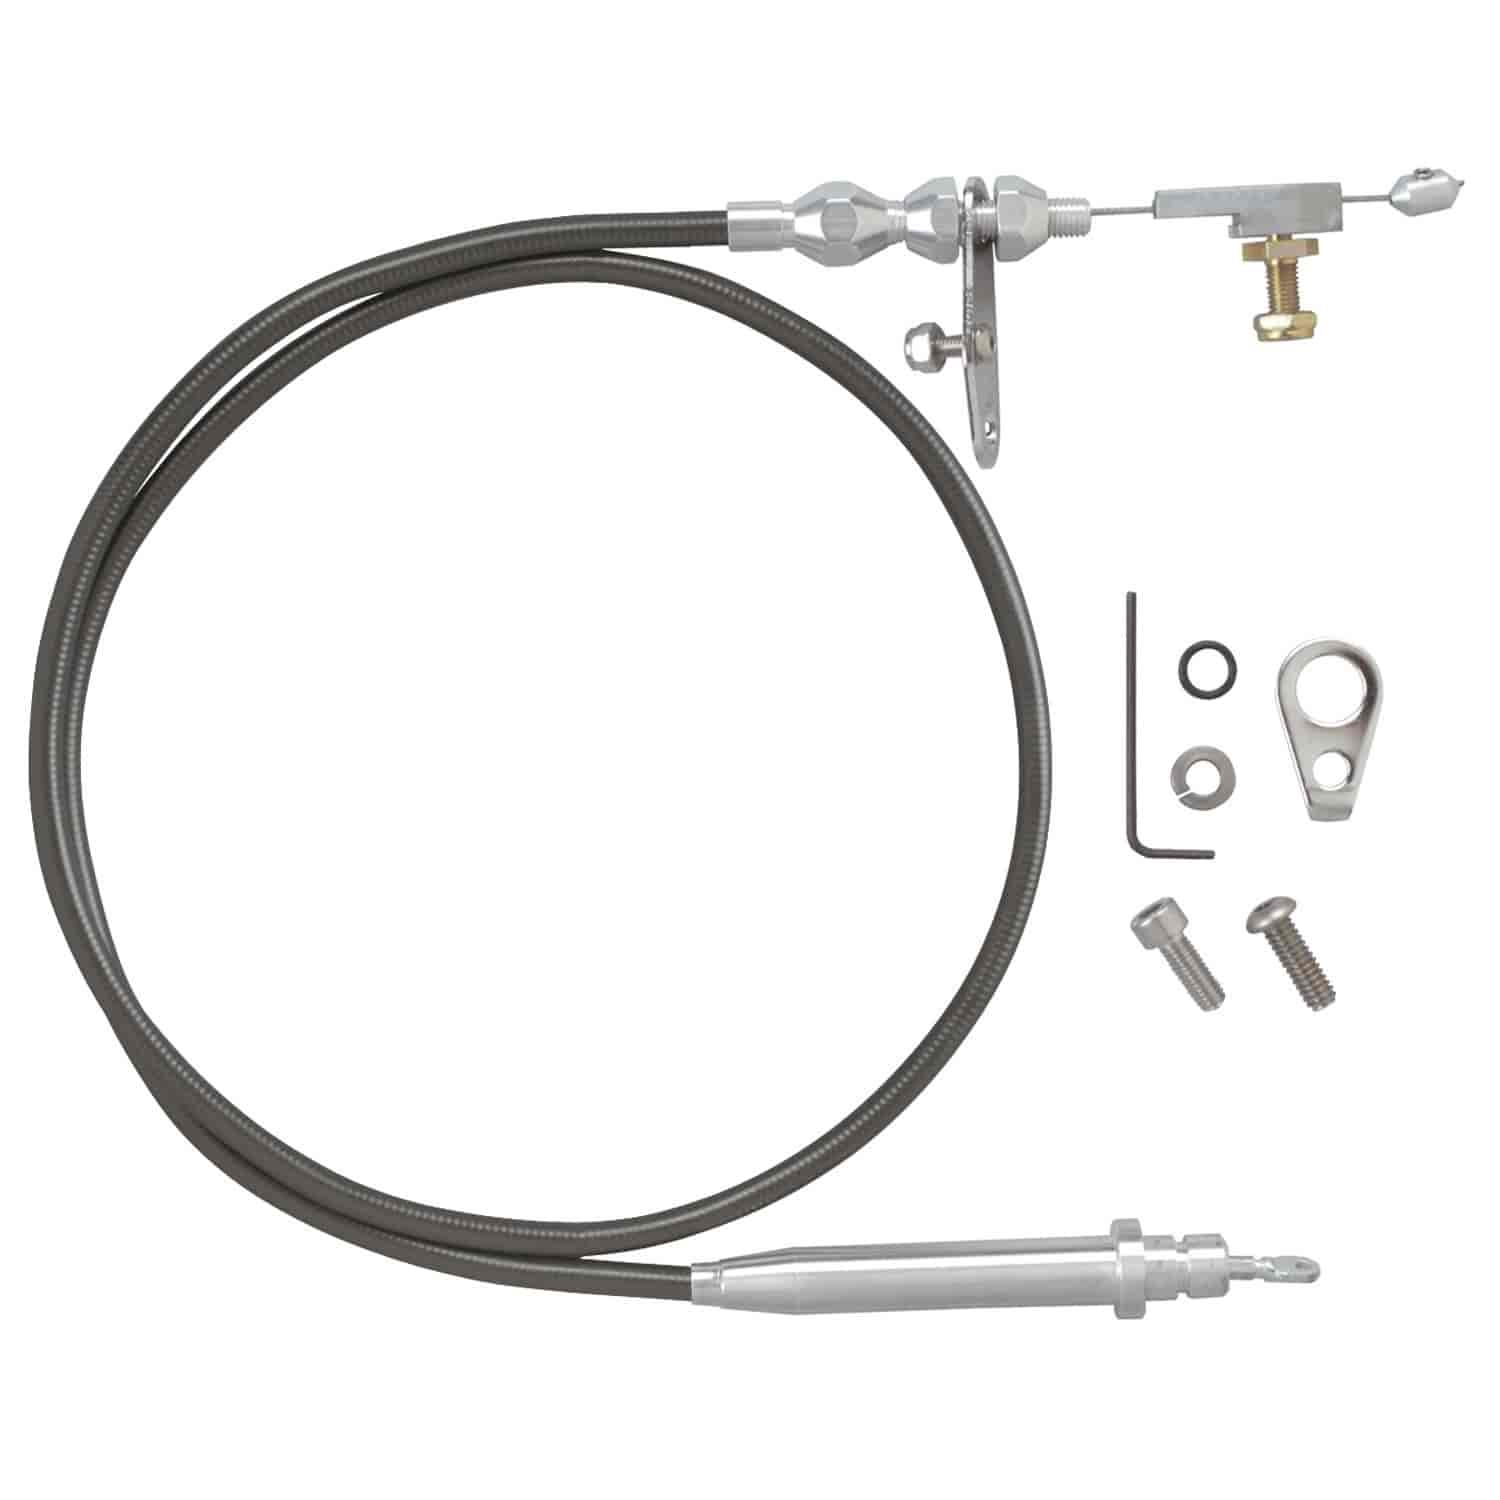 GM 200-4R Tuned Port Stainless Steel Kickdown Cable Kit Brushed Aluminum Fittings and Ferrule